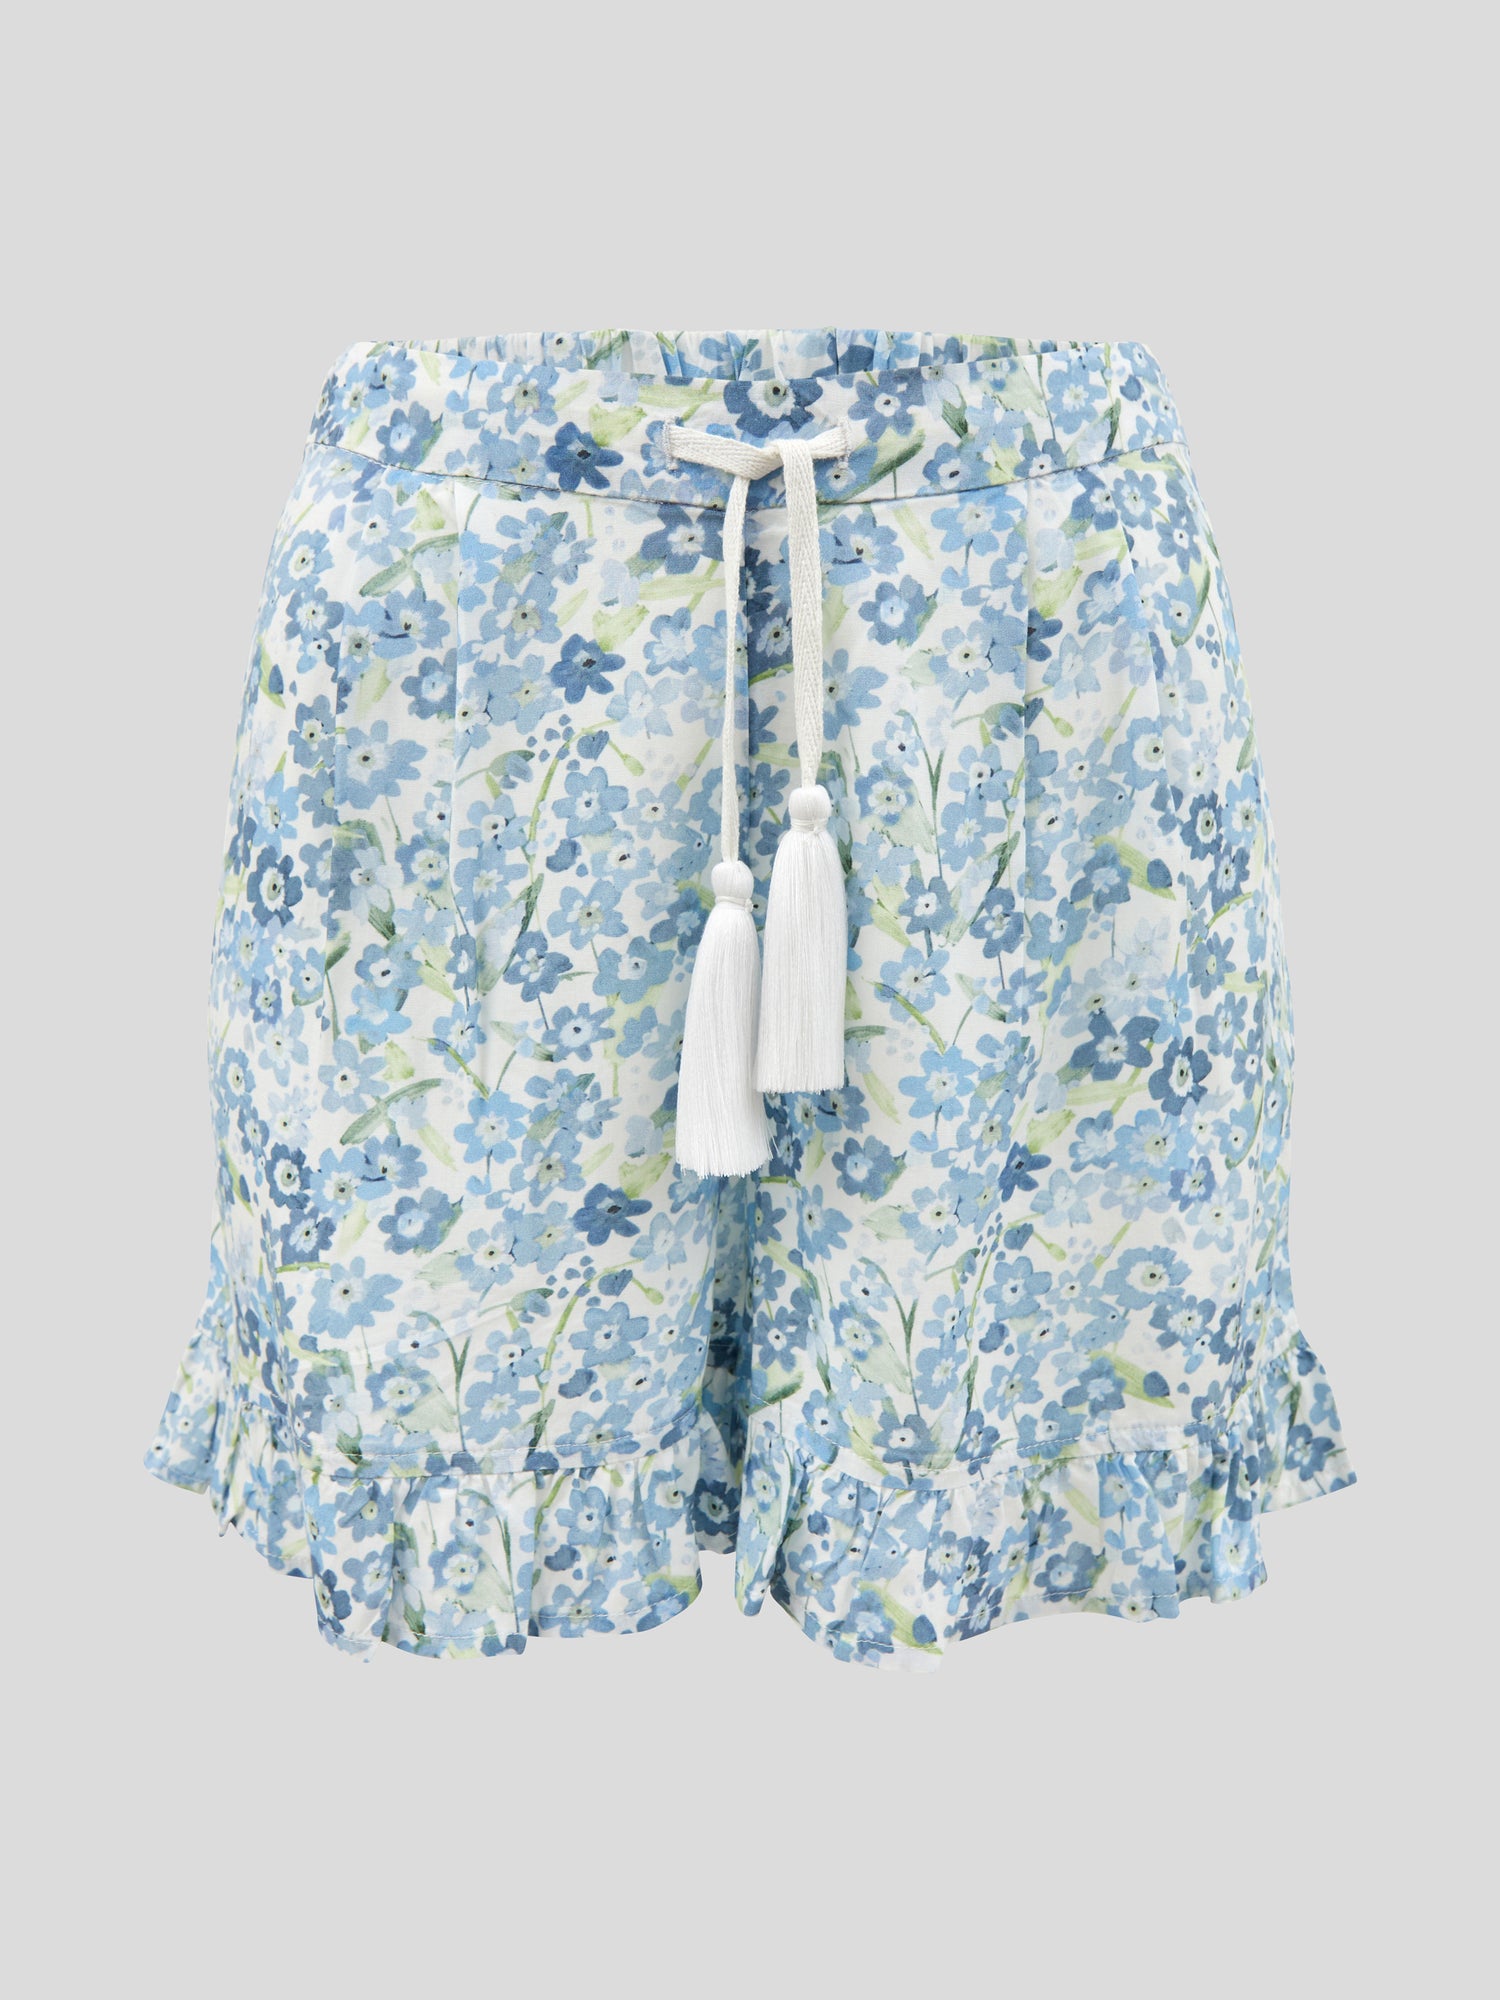 0123 Cyberjammies Madeline Shorts - 0123 Light Blue Floral Print